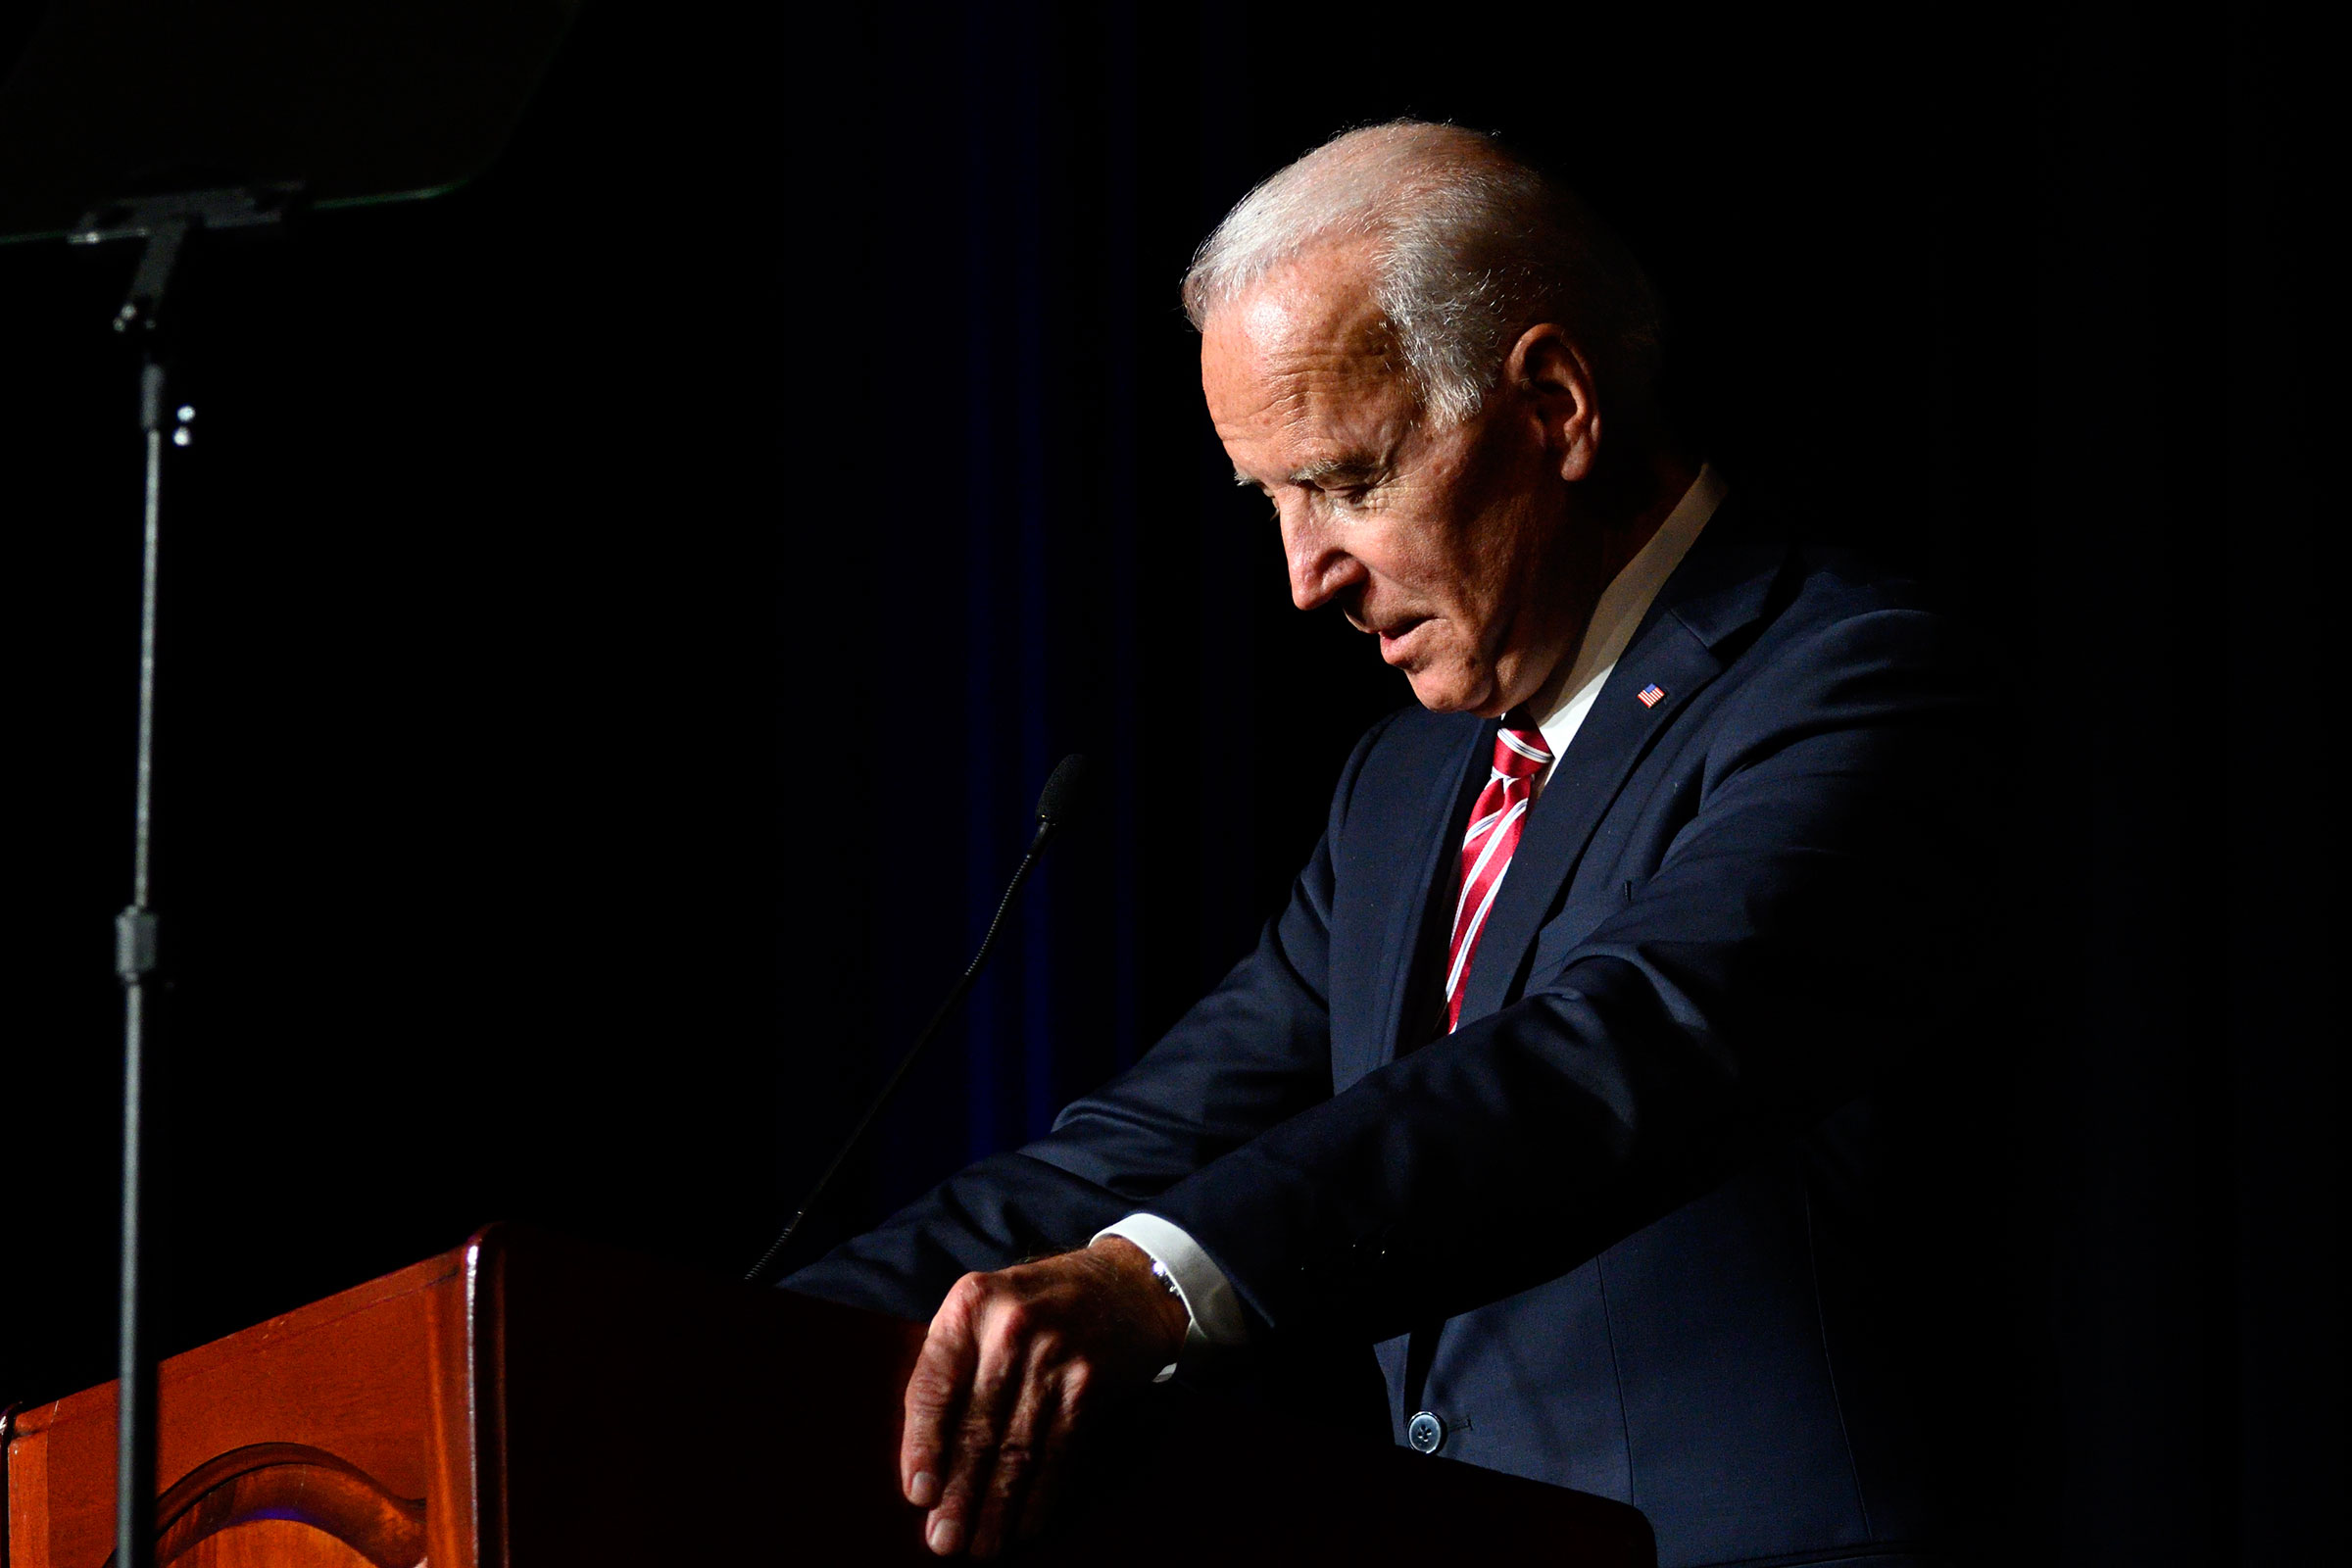 Joe Biden delivers the keynote speech at the First State Democratic Dinner in Dover, DE on March 16, 2019. (Bastiaan Slabbers—NurPhoto/Getty Images)